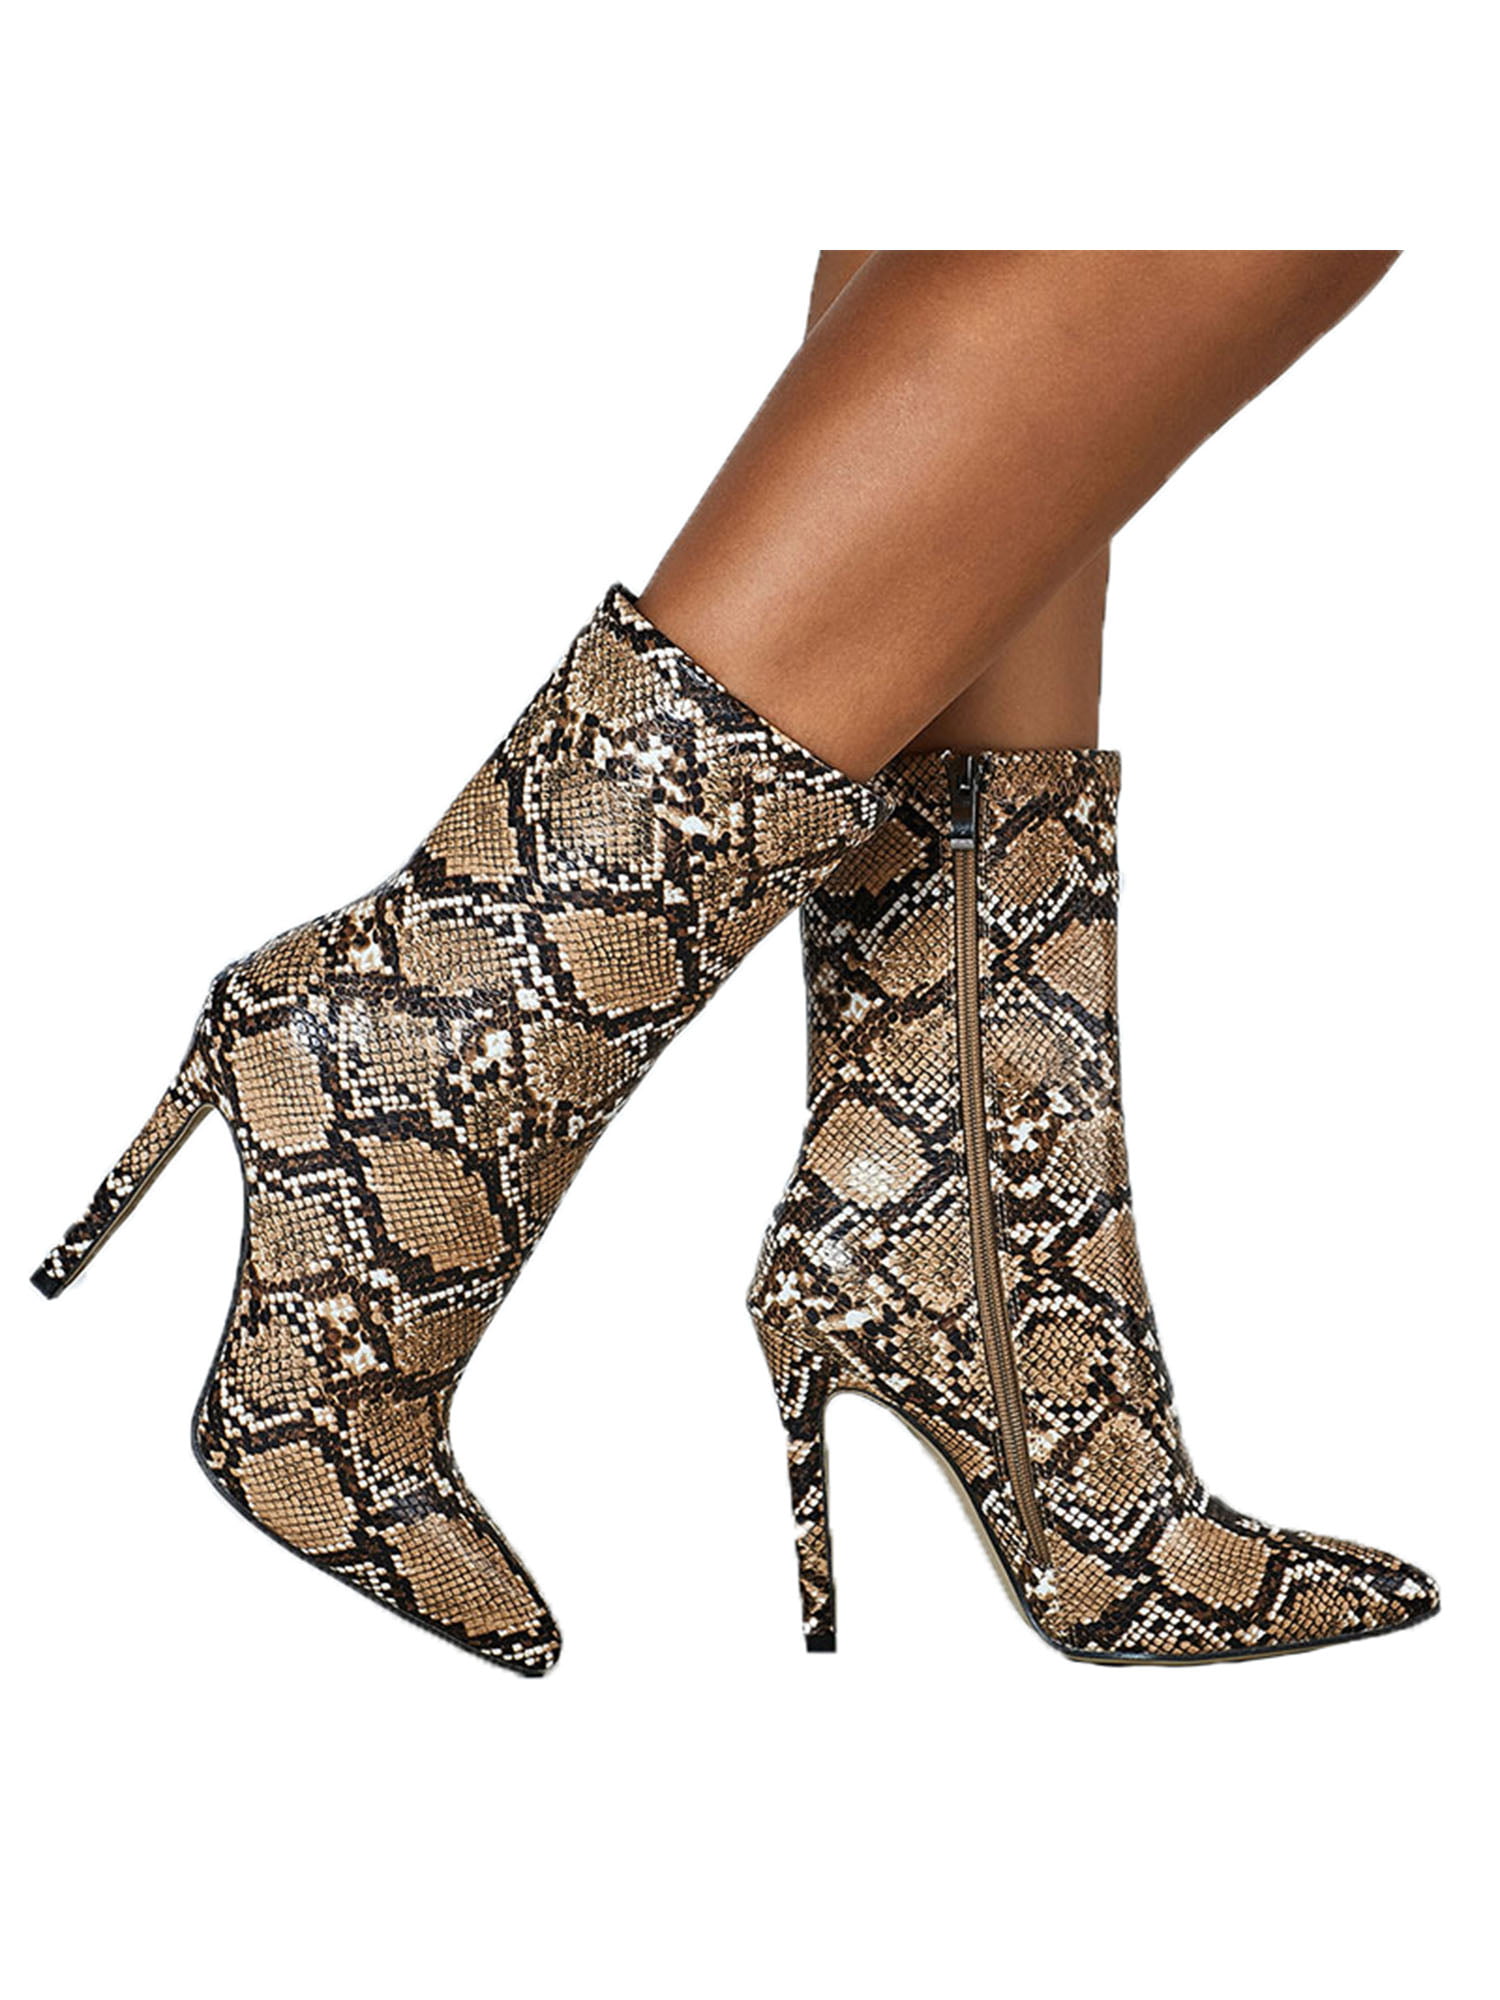 Womens Snake Patterns Pointed Toe Ankle Boots Printed Stilettos High Heels Shoes 